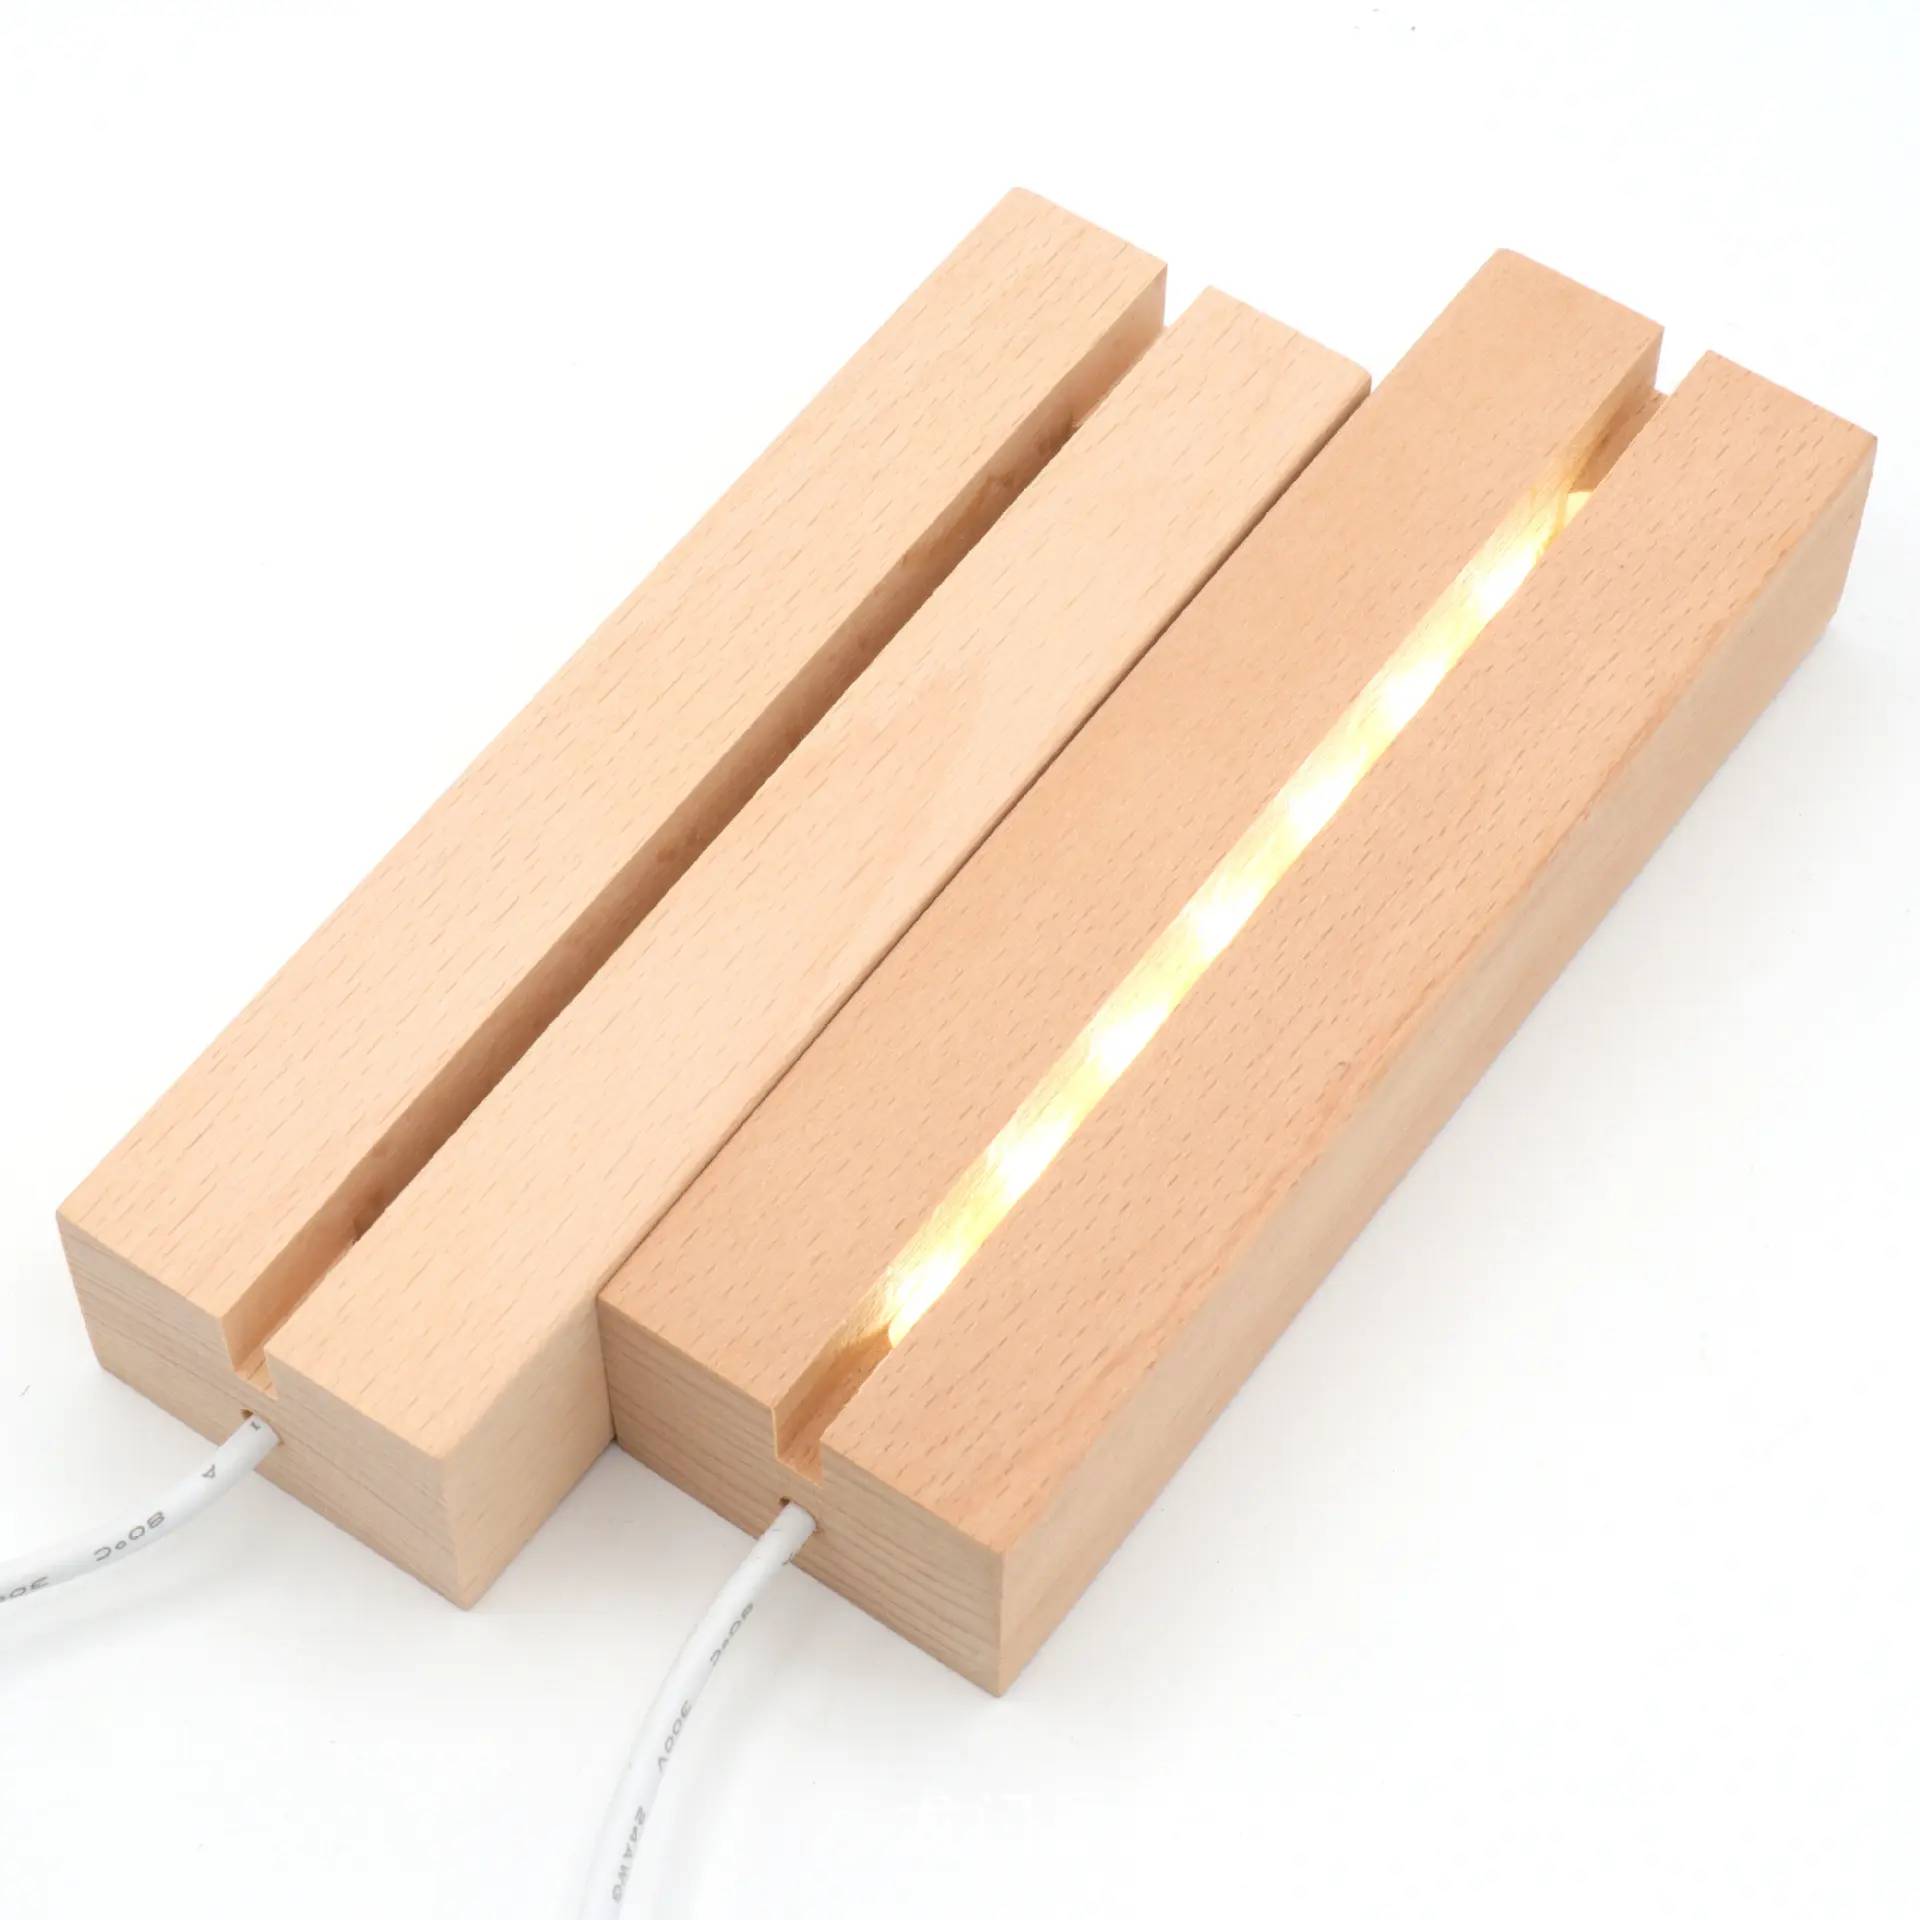 Solid wood rectangular luminous base creative DIY home 3d acrylic led wooden night light for ornaments crafts